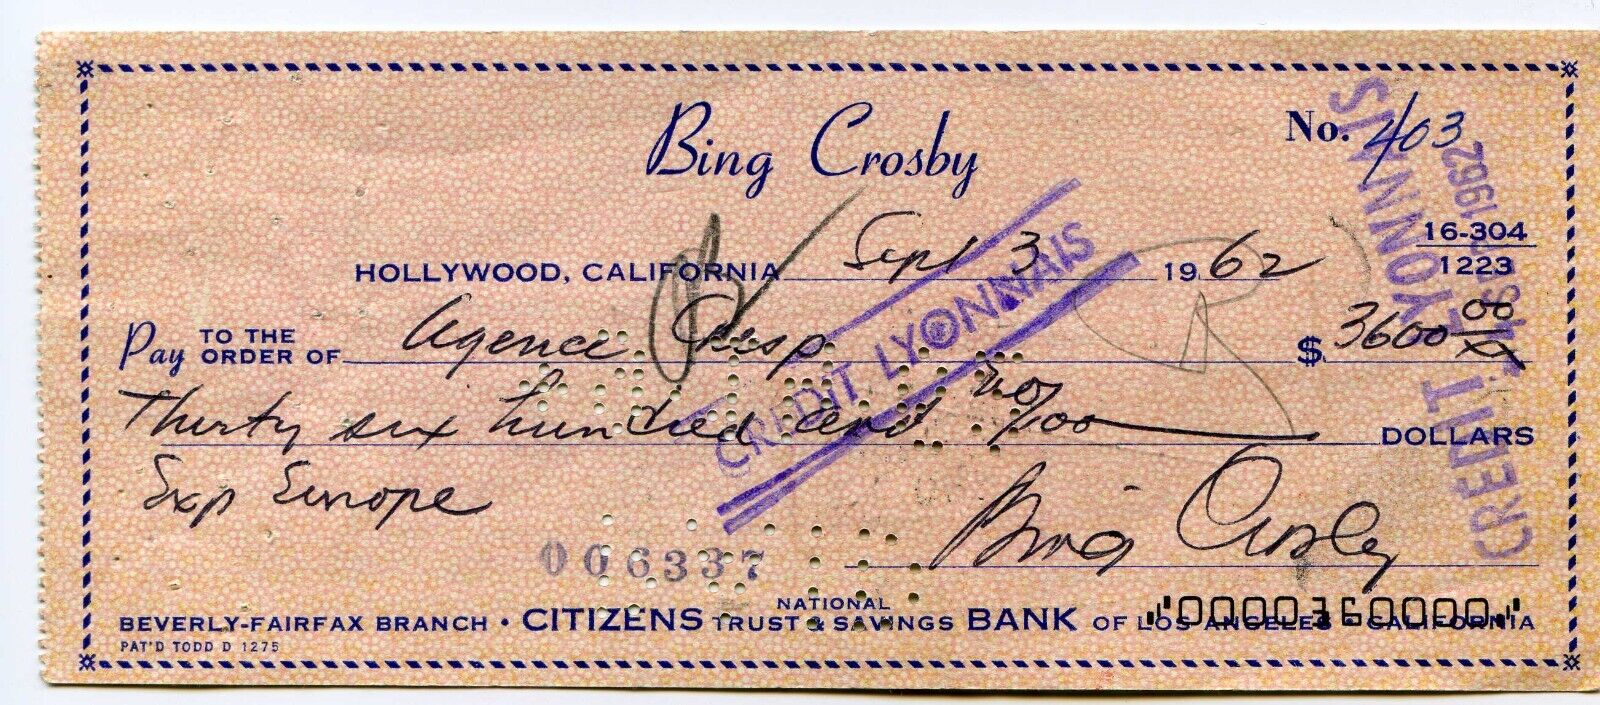 BING CROSBY AUTOGRAPHED SIGNED BANK NOTE CHECK September 1962 Original Cheque